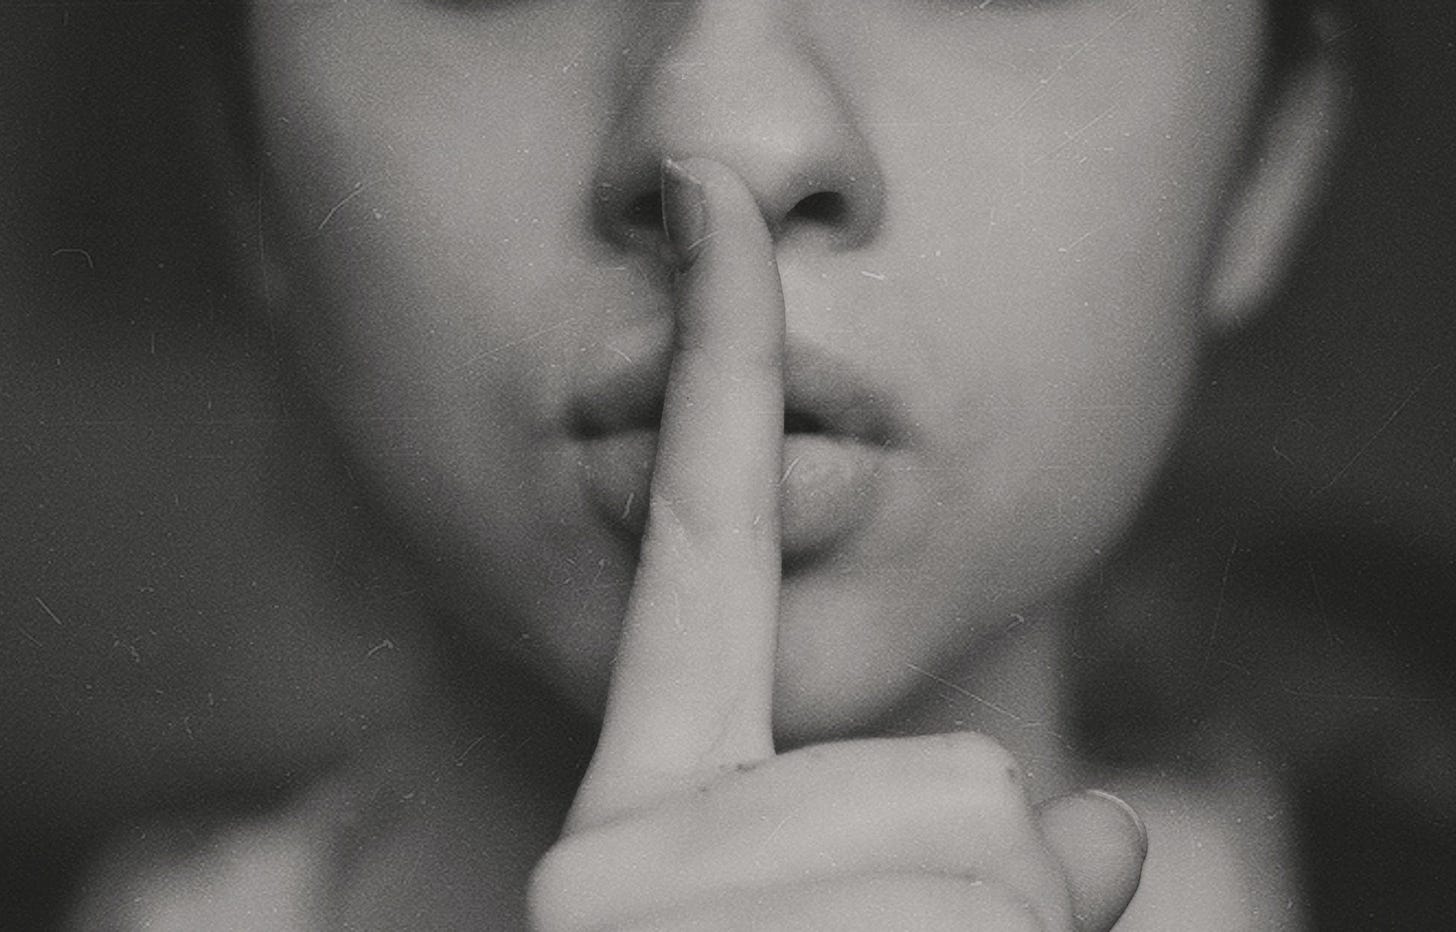 Picture from Unsplash: A woman with a finger on her lips